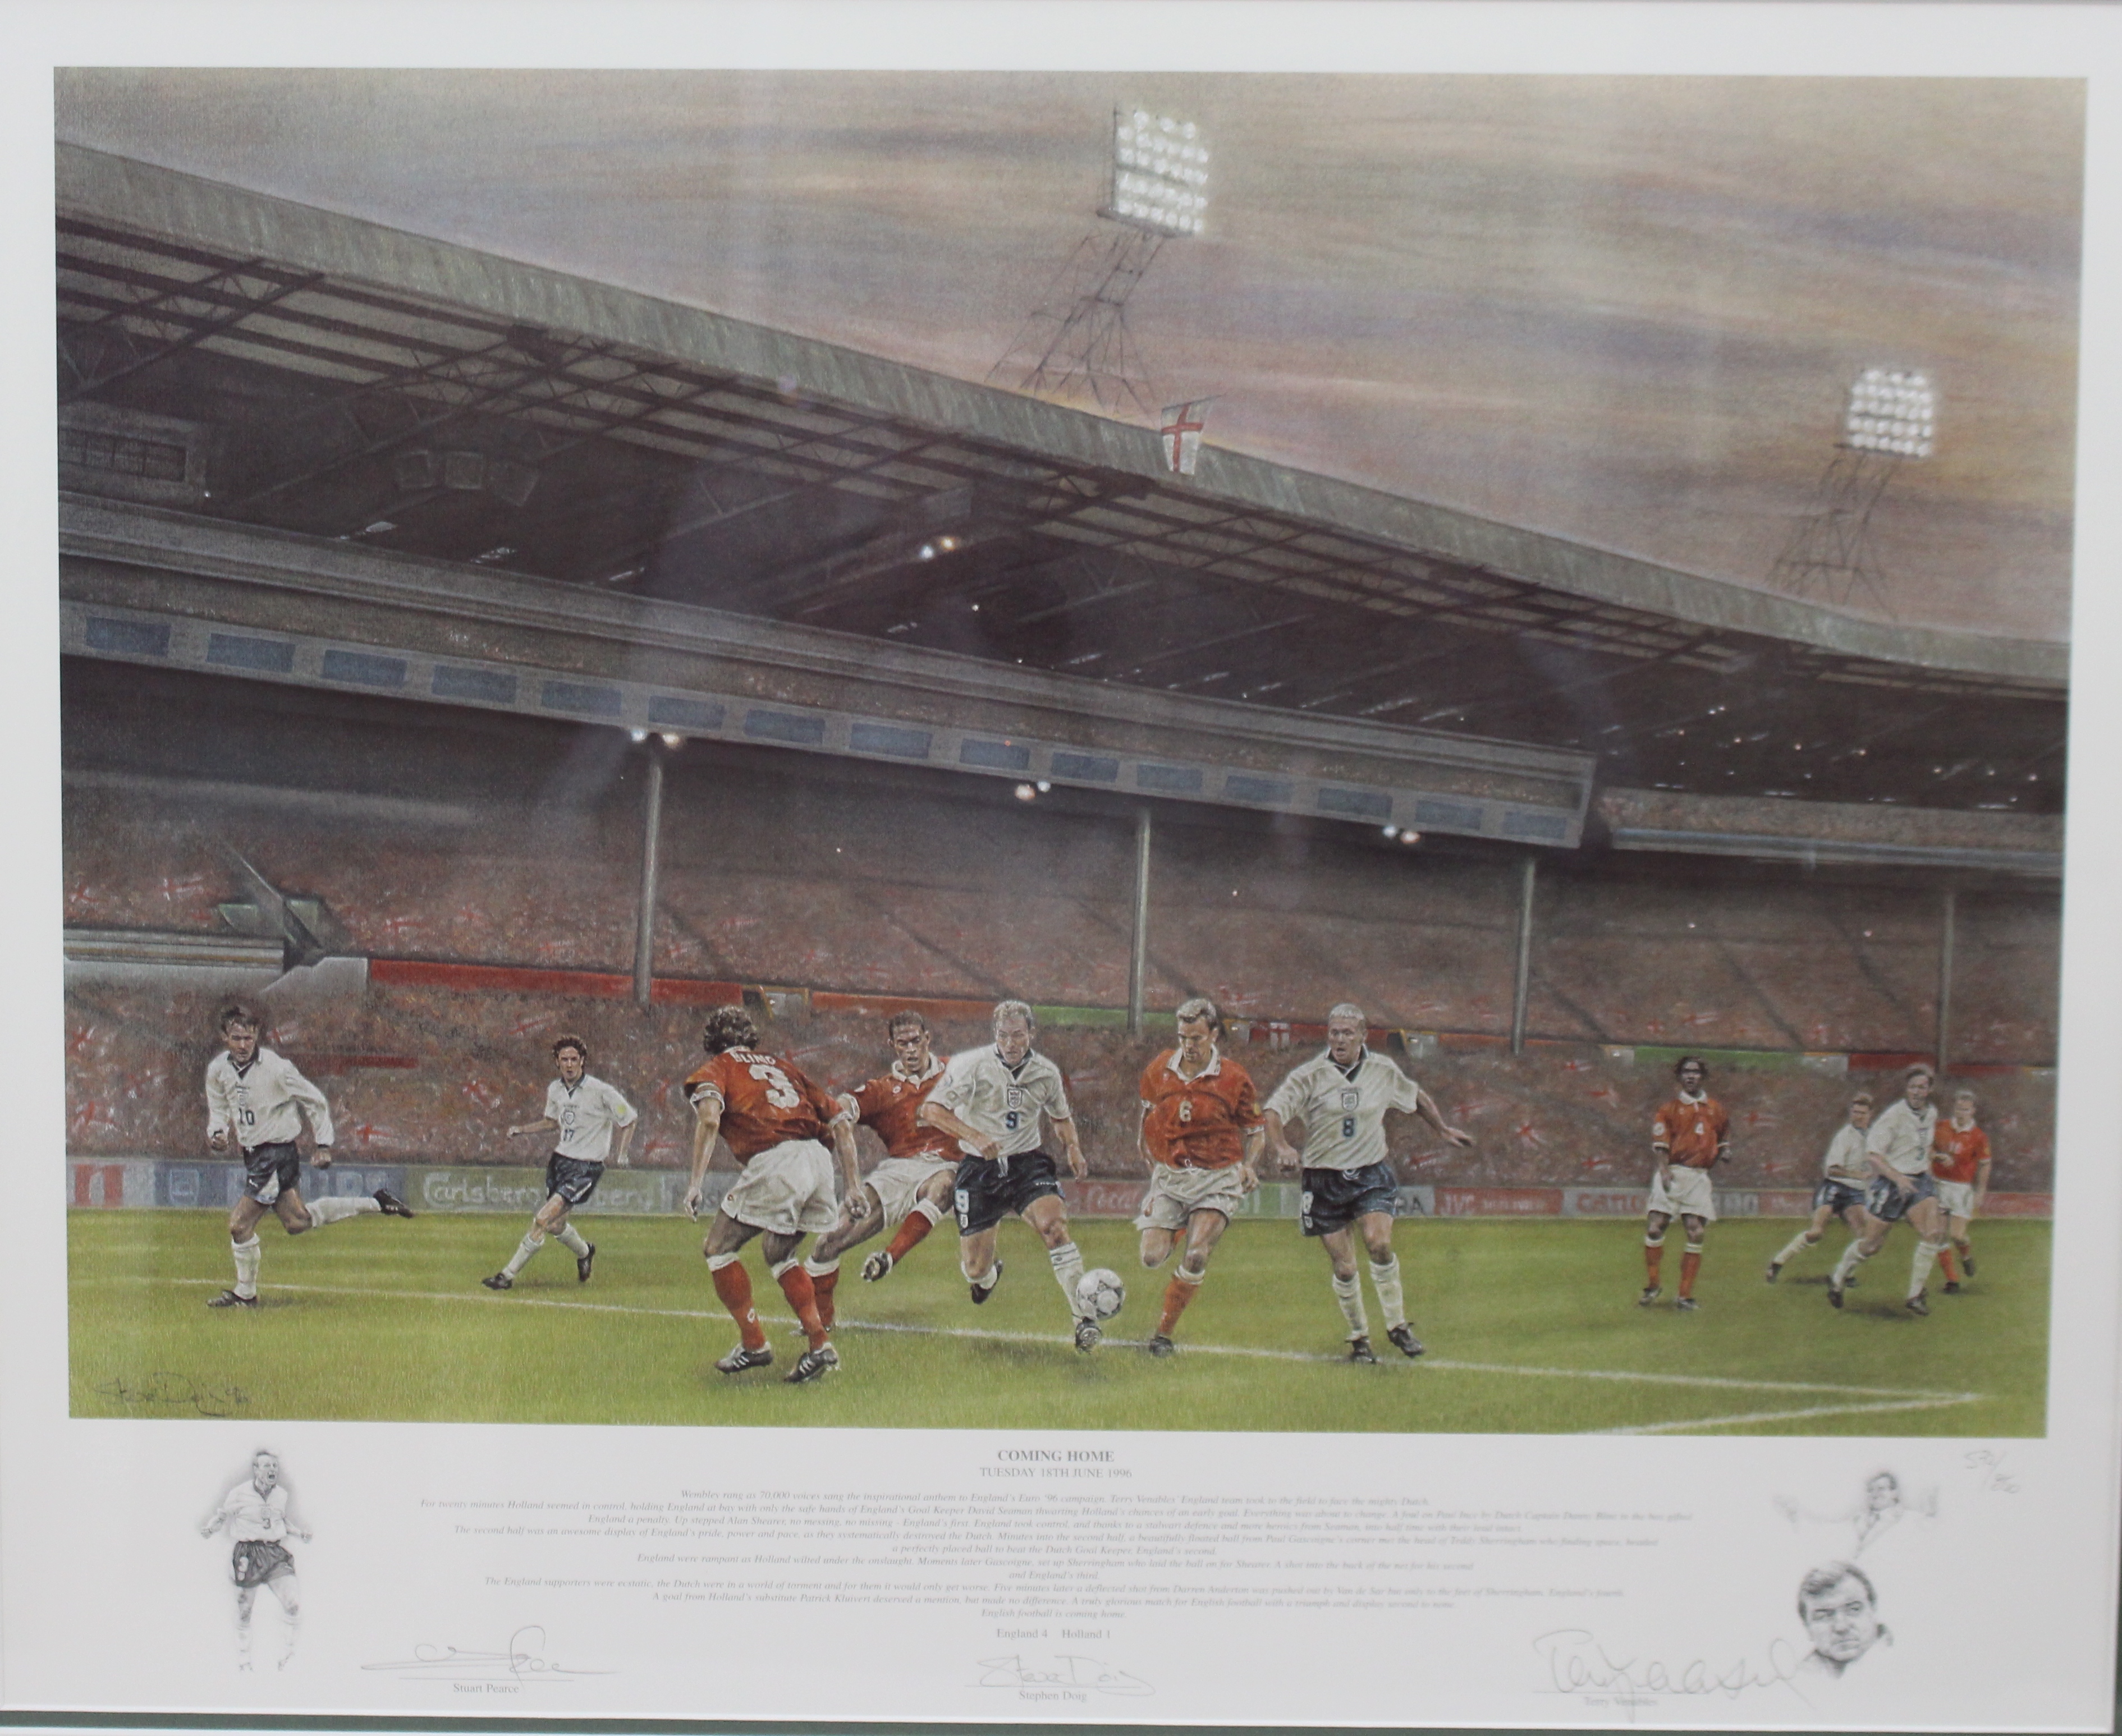 Signed Limited Edition Framed Football Print "Coming Home" - Image 3 of 5